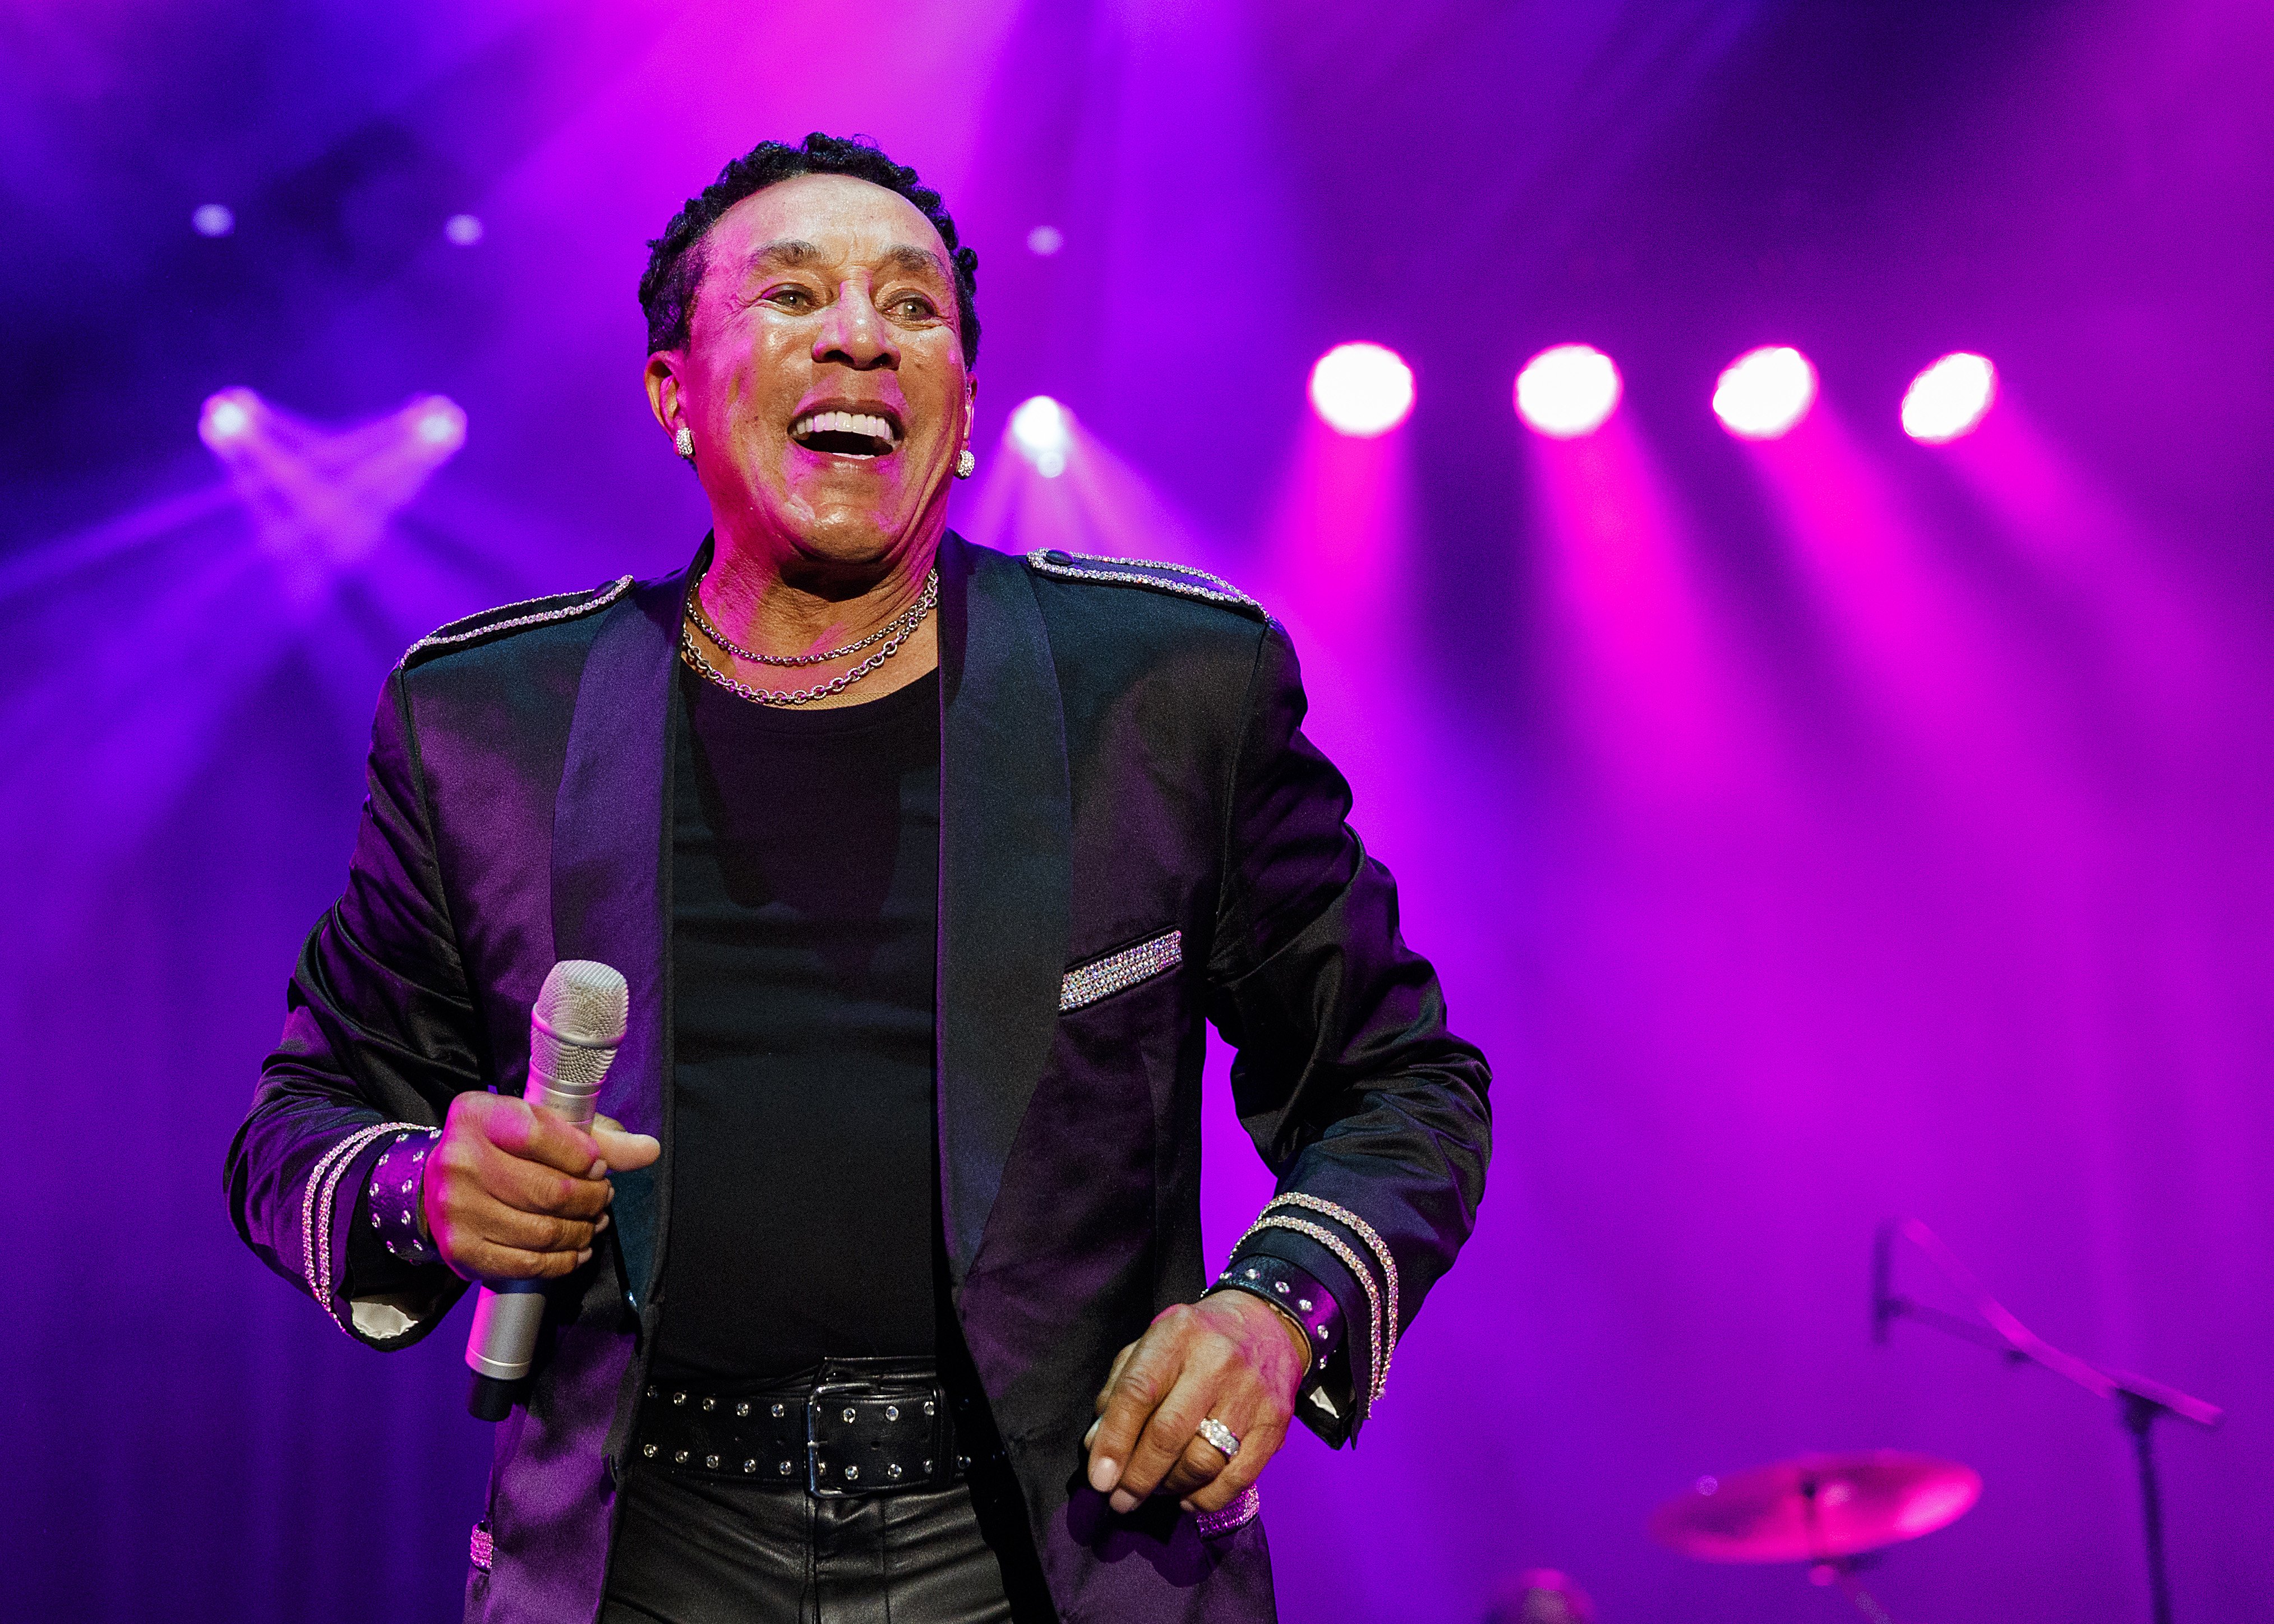 Smokey Robinson performs on stage during Summer Night Concerts at PNE Amphitheatre on August 23, 2019 in Vancouver, Canada. 